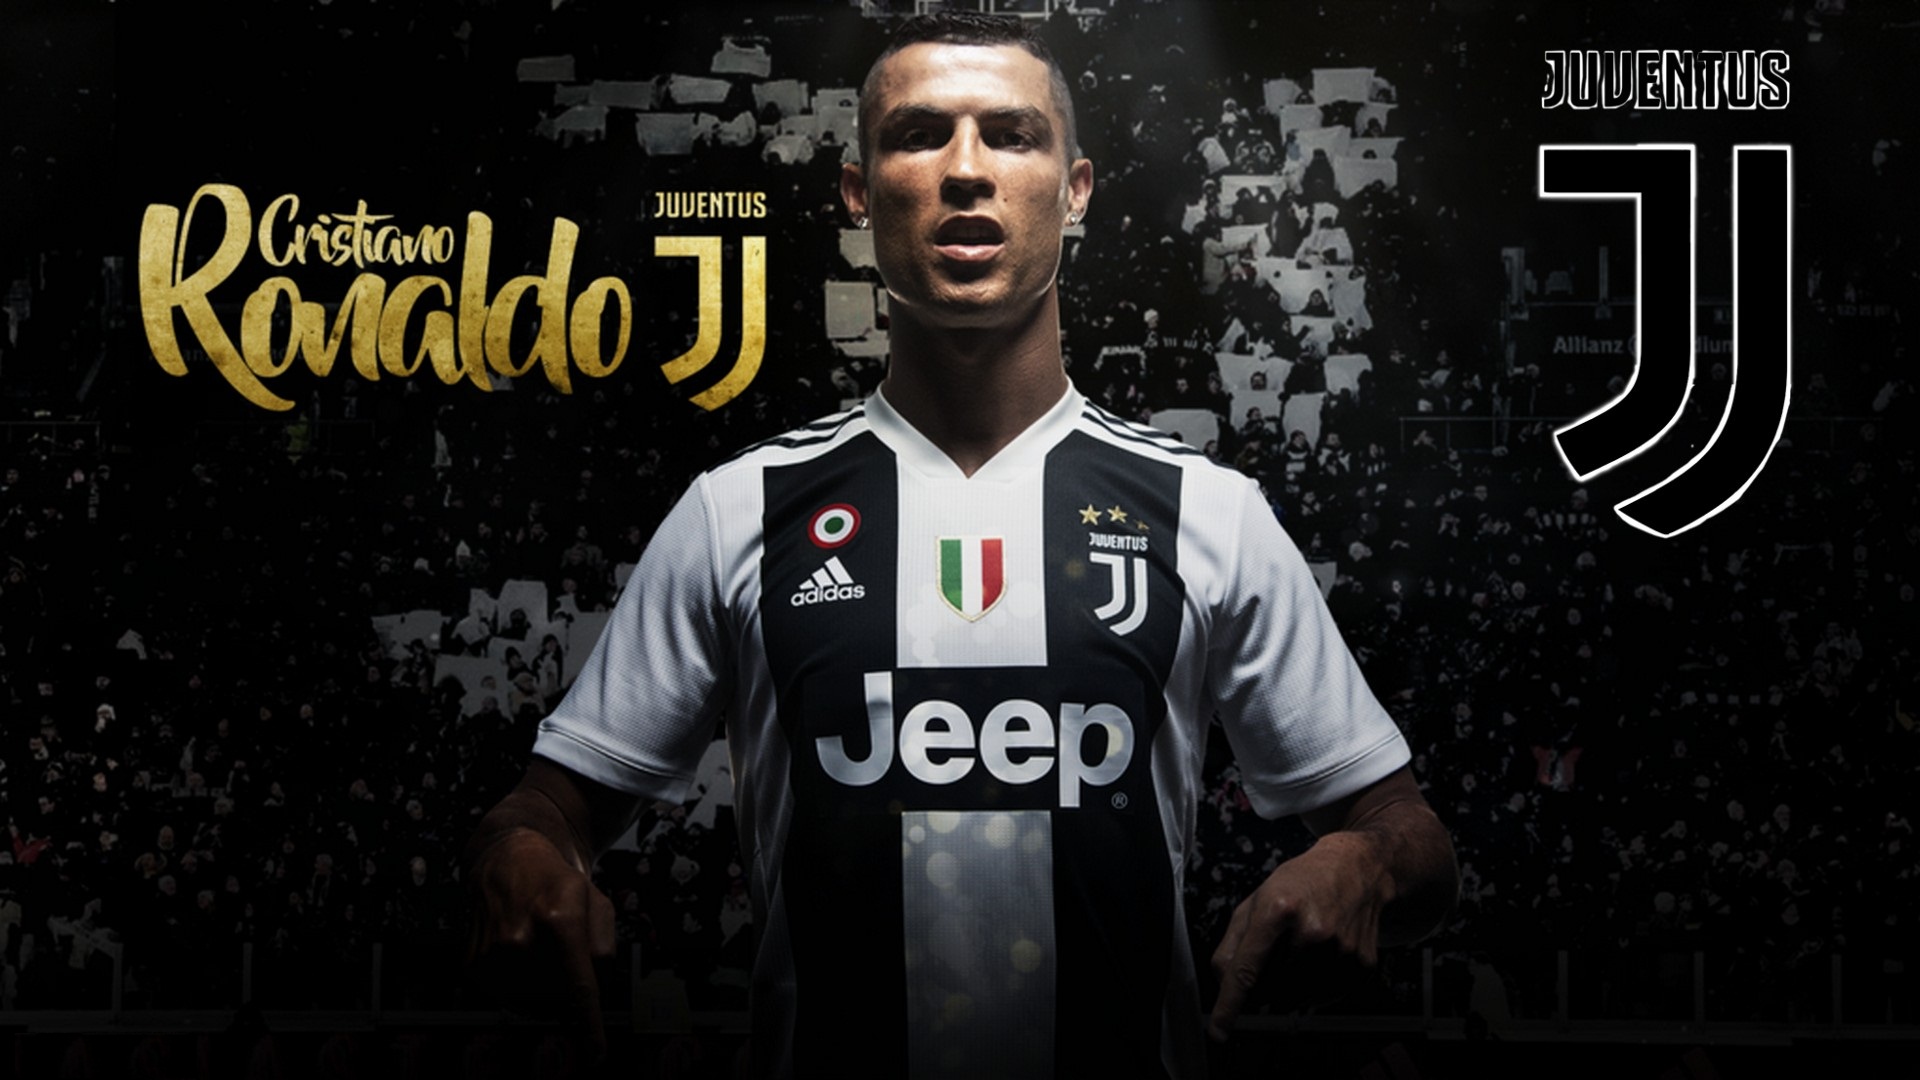 Cristiano Ronaldo Juventus Backgrounds HD With Resolution 1920X1080 pixel. You can make this wallpaper for your Mac or Windows Desktop Background, iPhone, Android or Tablet and another Smartphone device for free